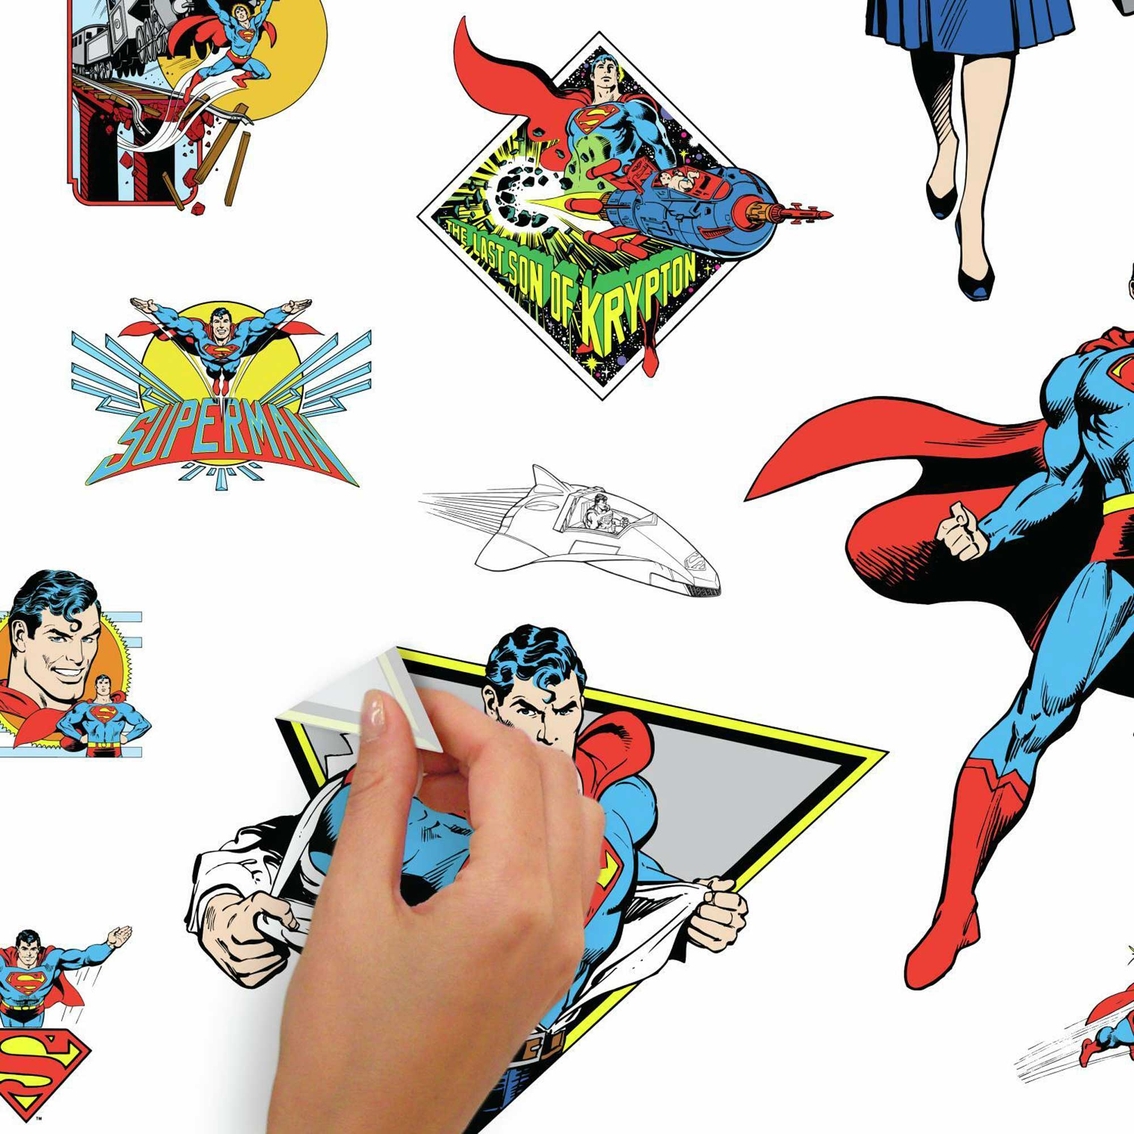 RoomMates Classic Superman Characters Peel and Stick Wall Decals - Image 5 of 5